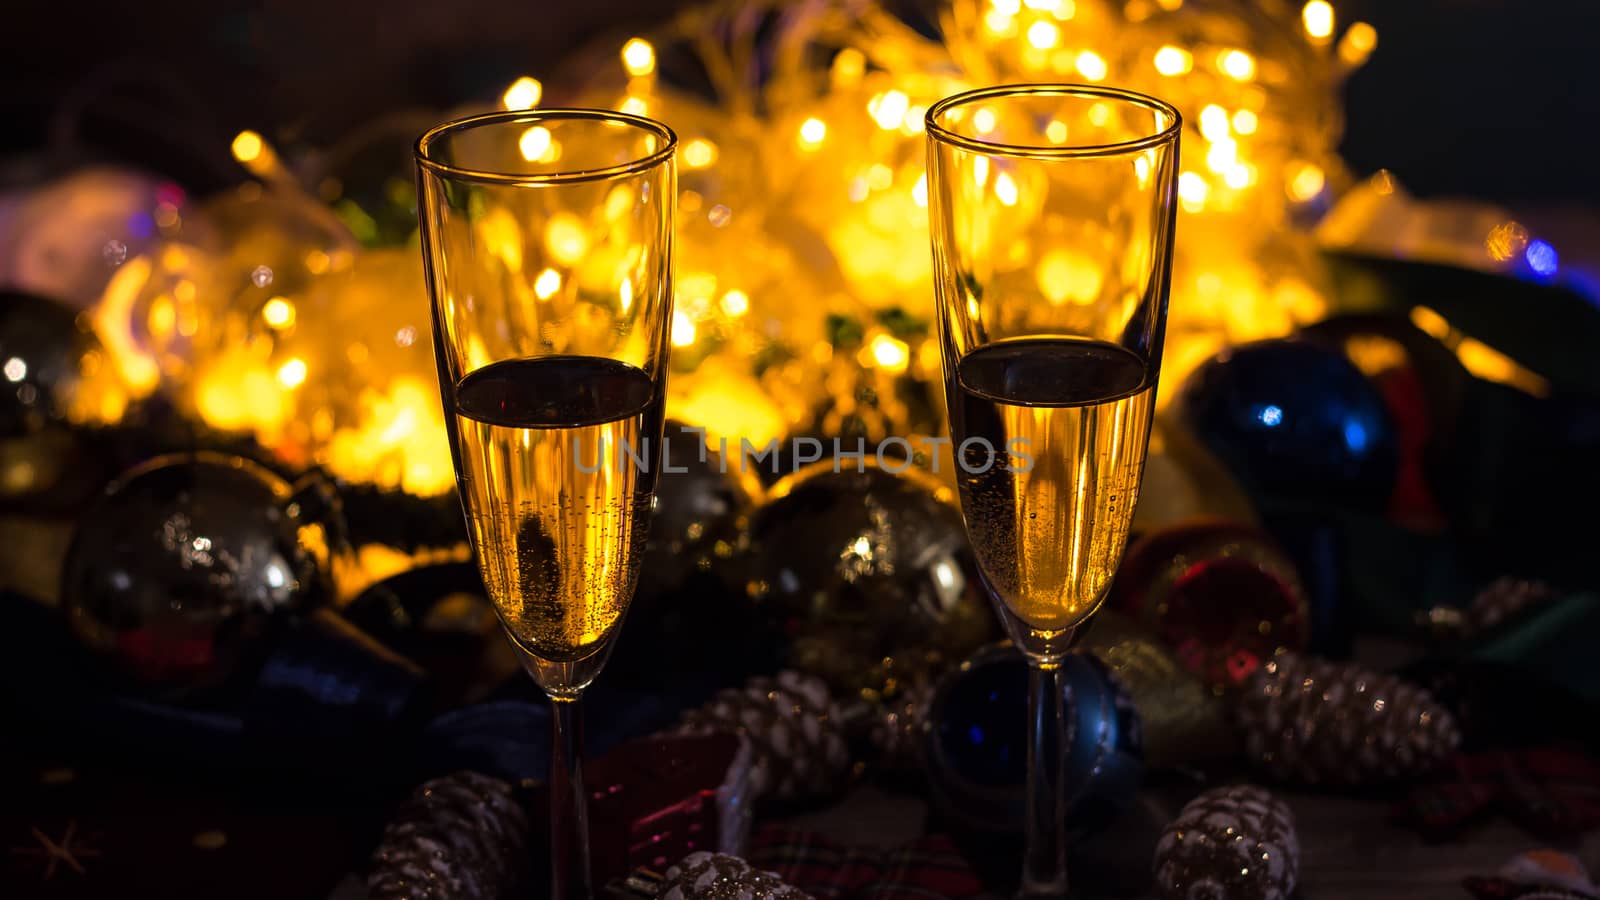 Glasses of champagne on the Christmas table with Christmas toys  by YevgeniySam